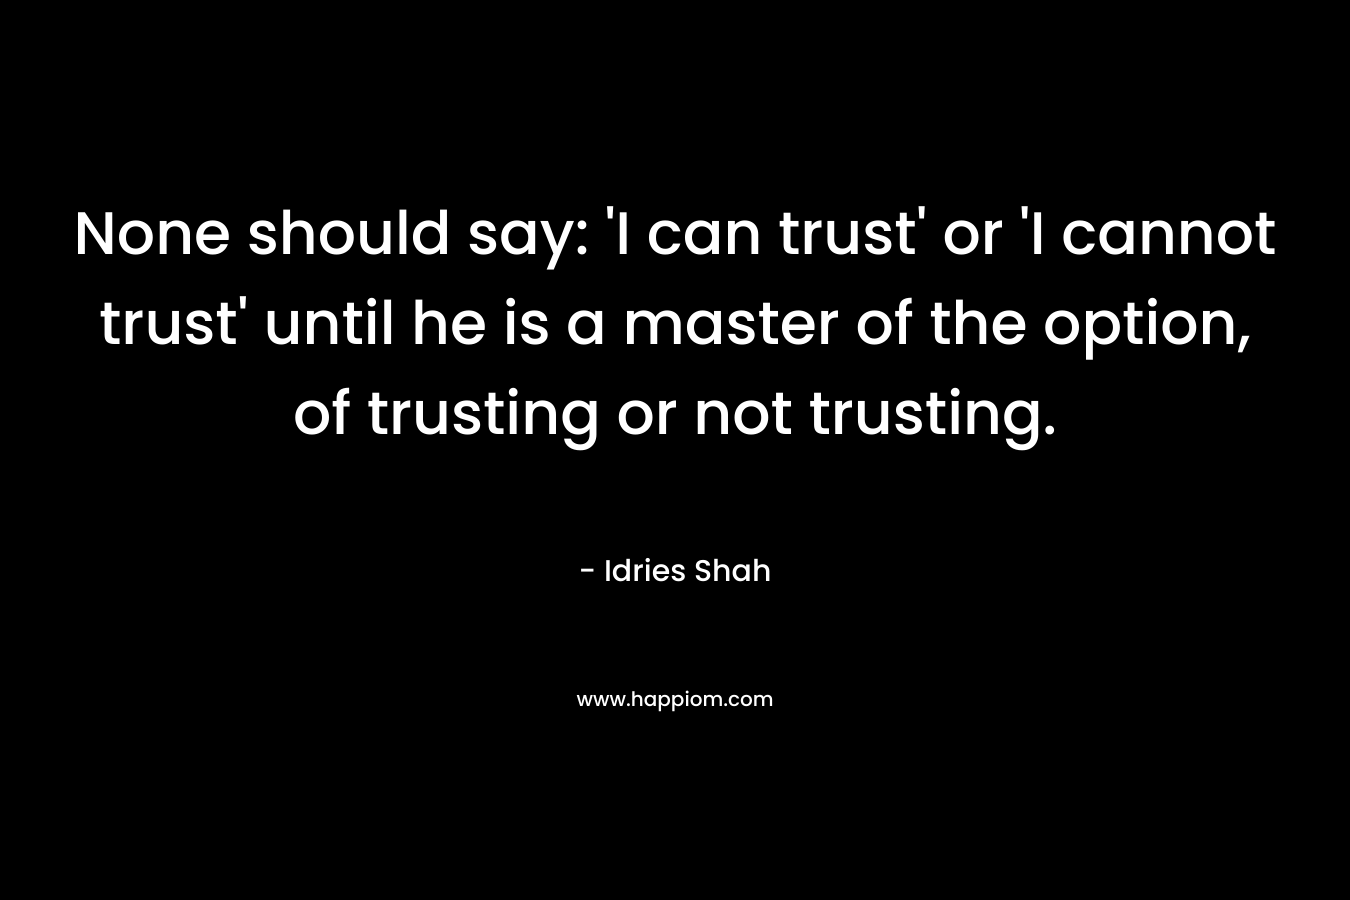 None should say: 'I can trust' or 'I cannot trust' until he is a master of the option, of trusting or not trusting.